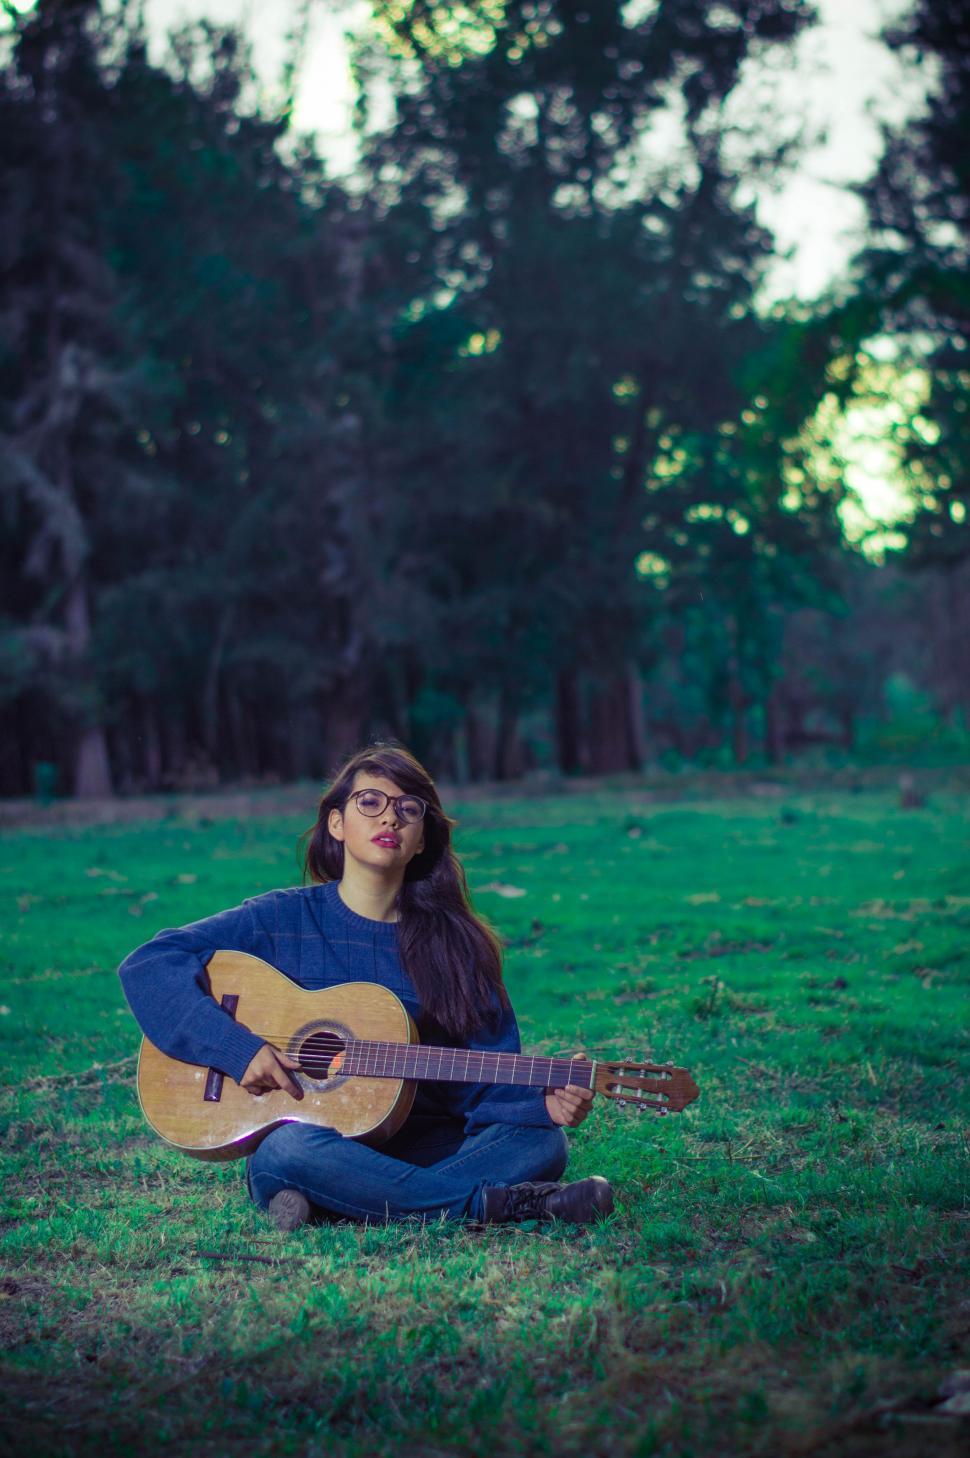 Free Image of Female Guitarist in park - looking at camera  